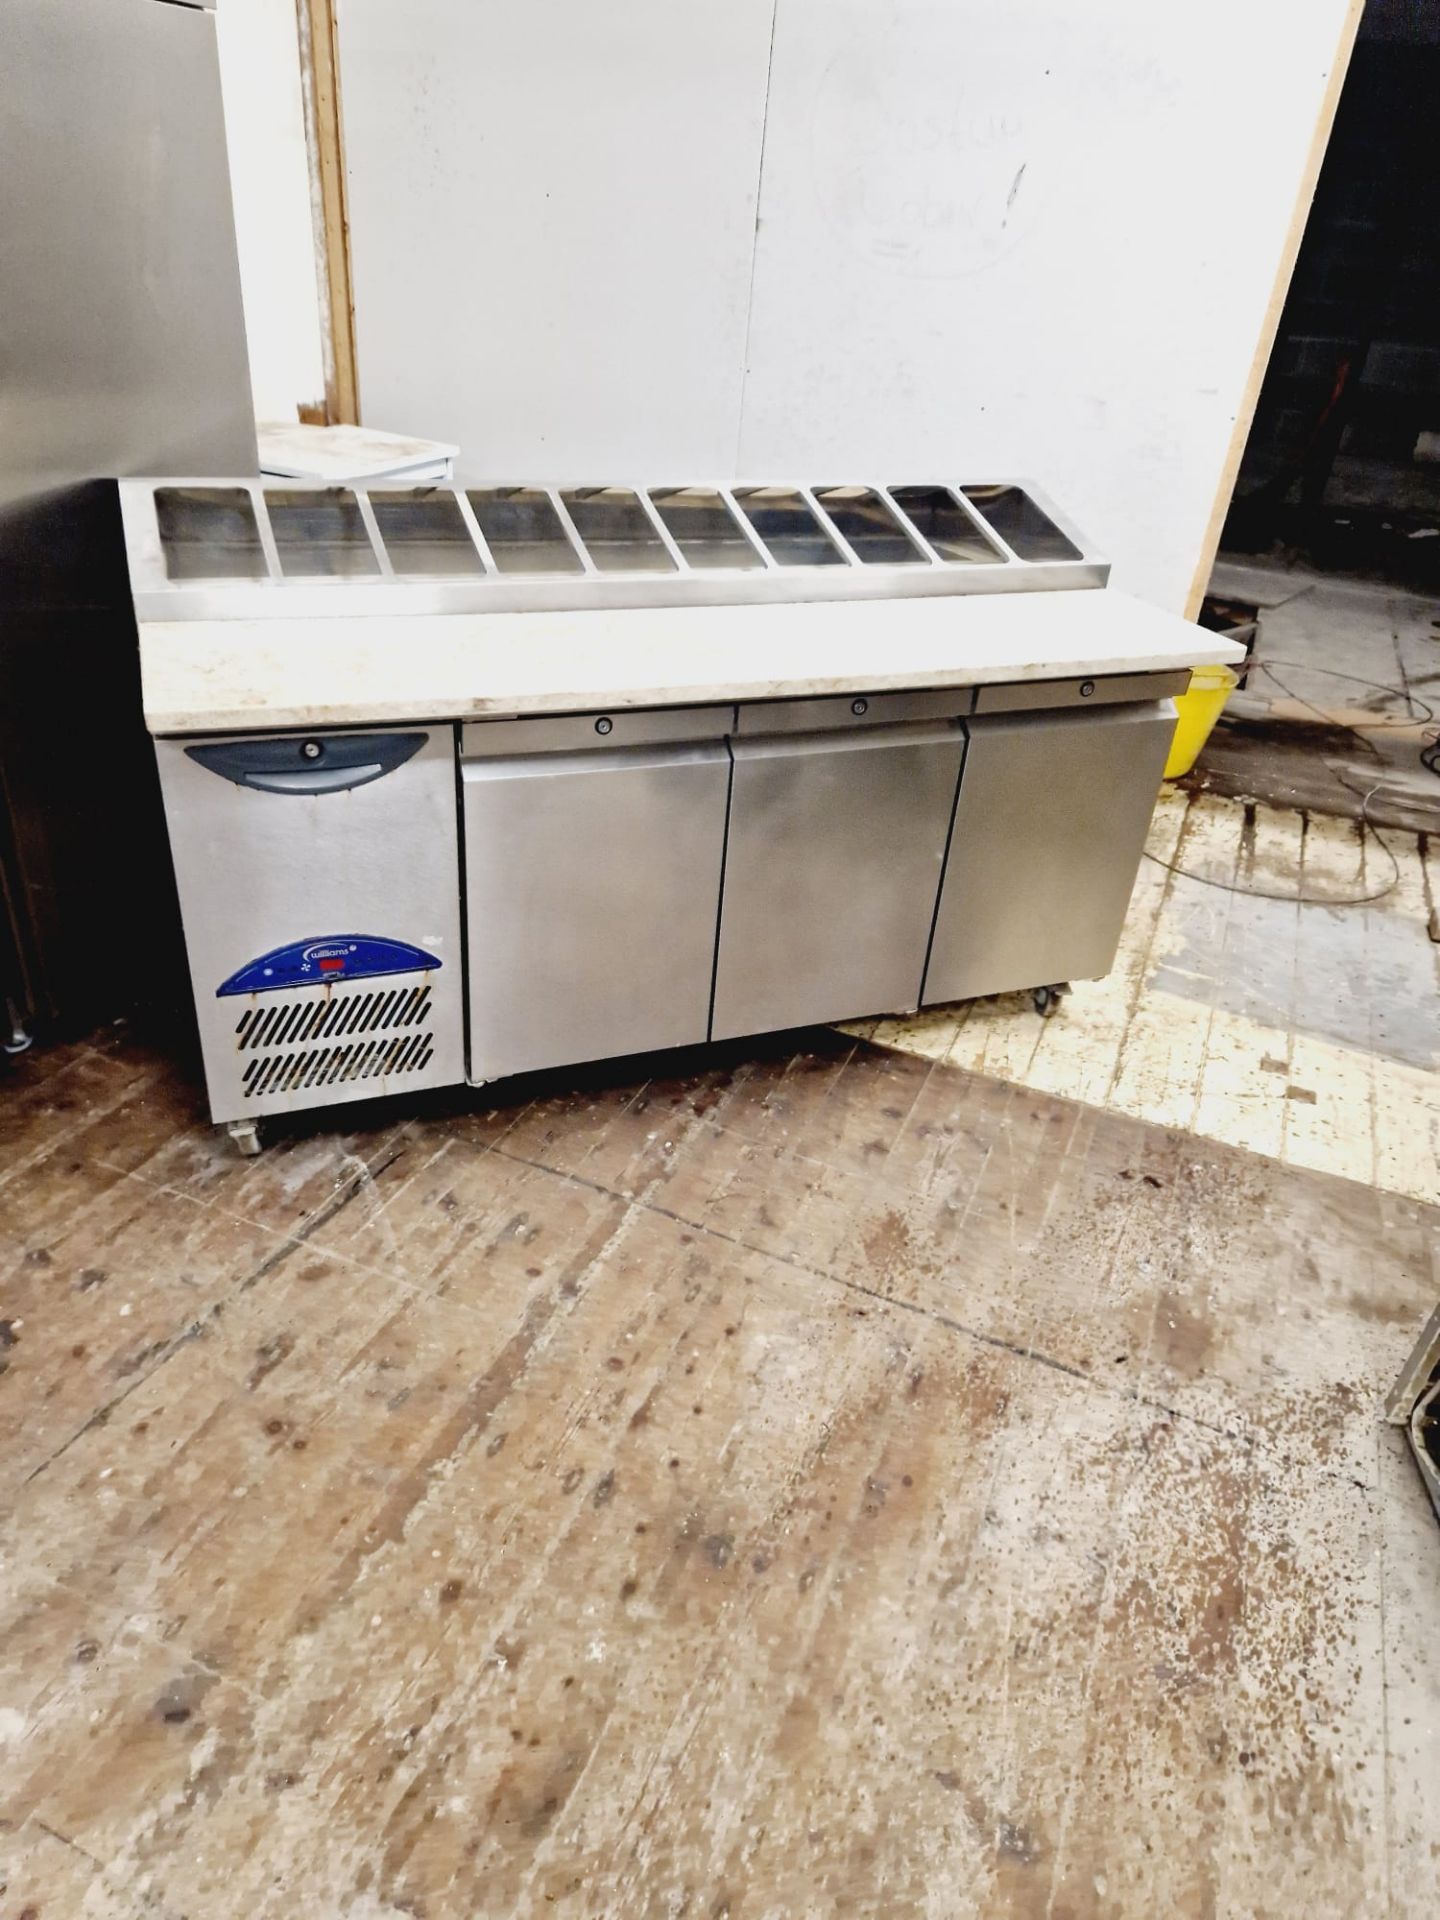 WILLIAMS PIZZA PERP FRIDGE WITH GRANITE WORK TOP - 3 DOOR PIZZA TOPPING  FRIDGE - FULLY WORKING AND 